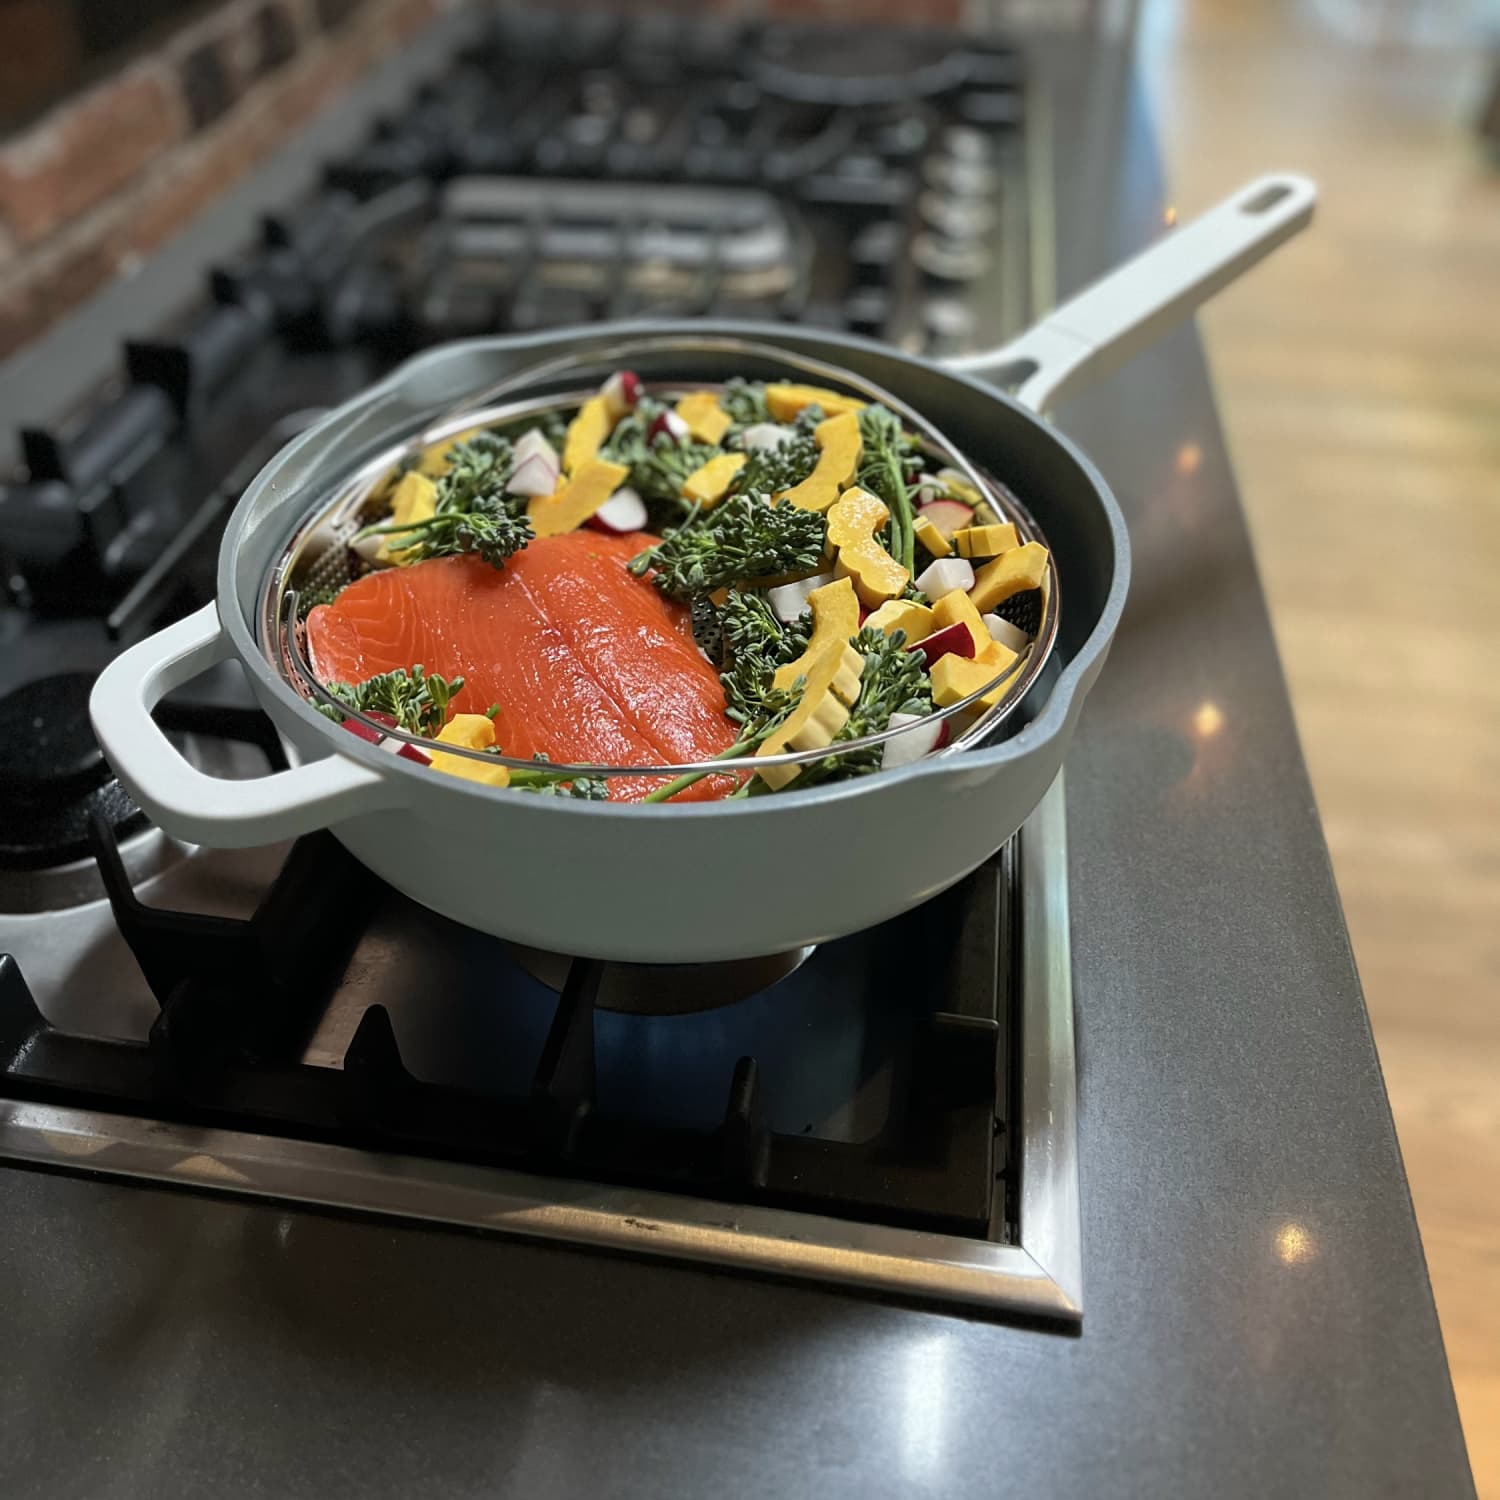 Drew Barrymore's Cookware Line Launches Hero Pan